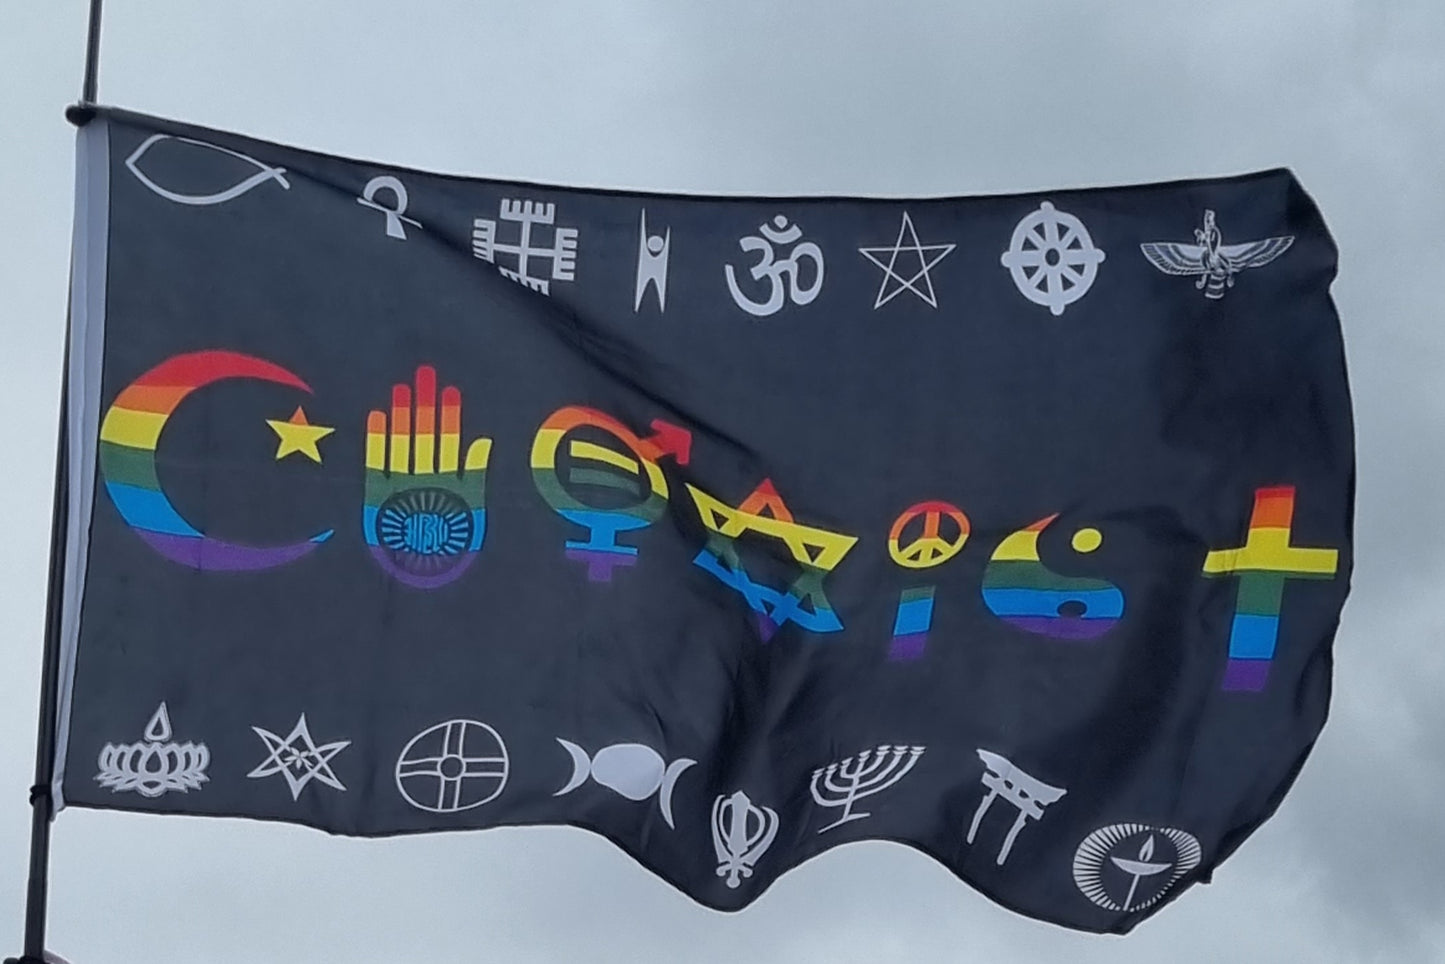 Coexist rainbow flag 5ft x 3ft with eyelets